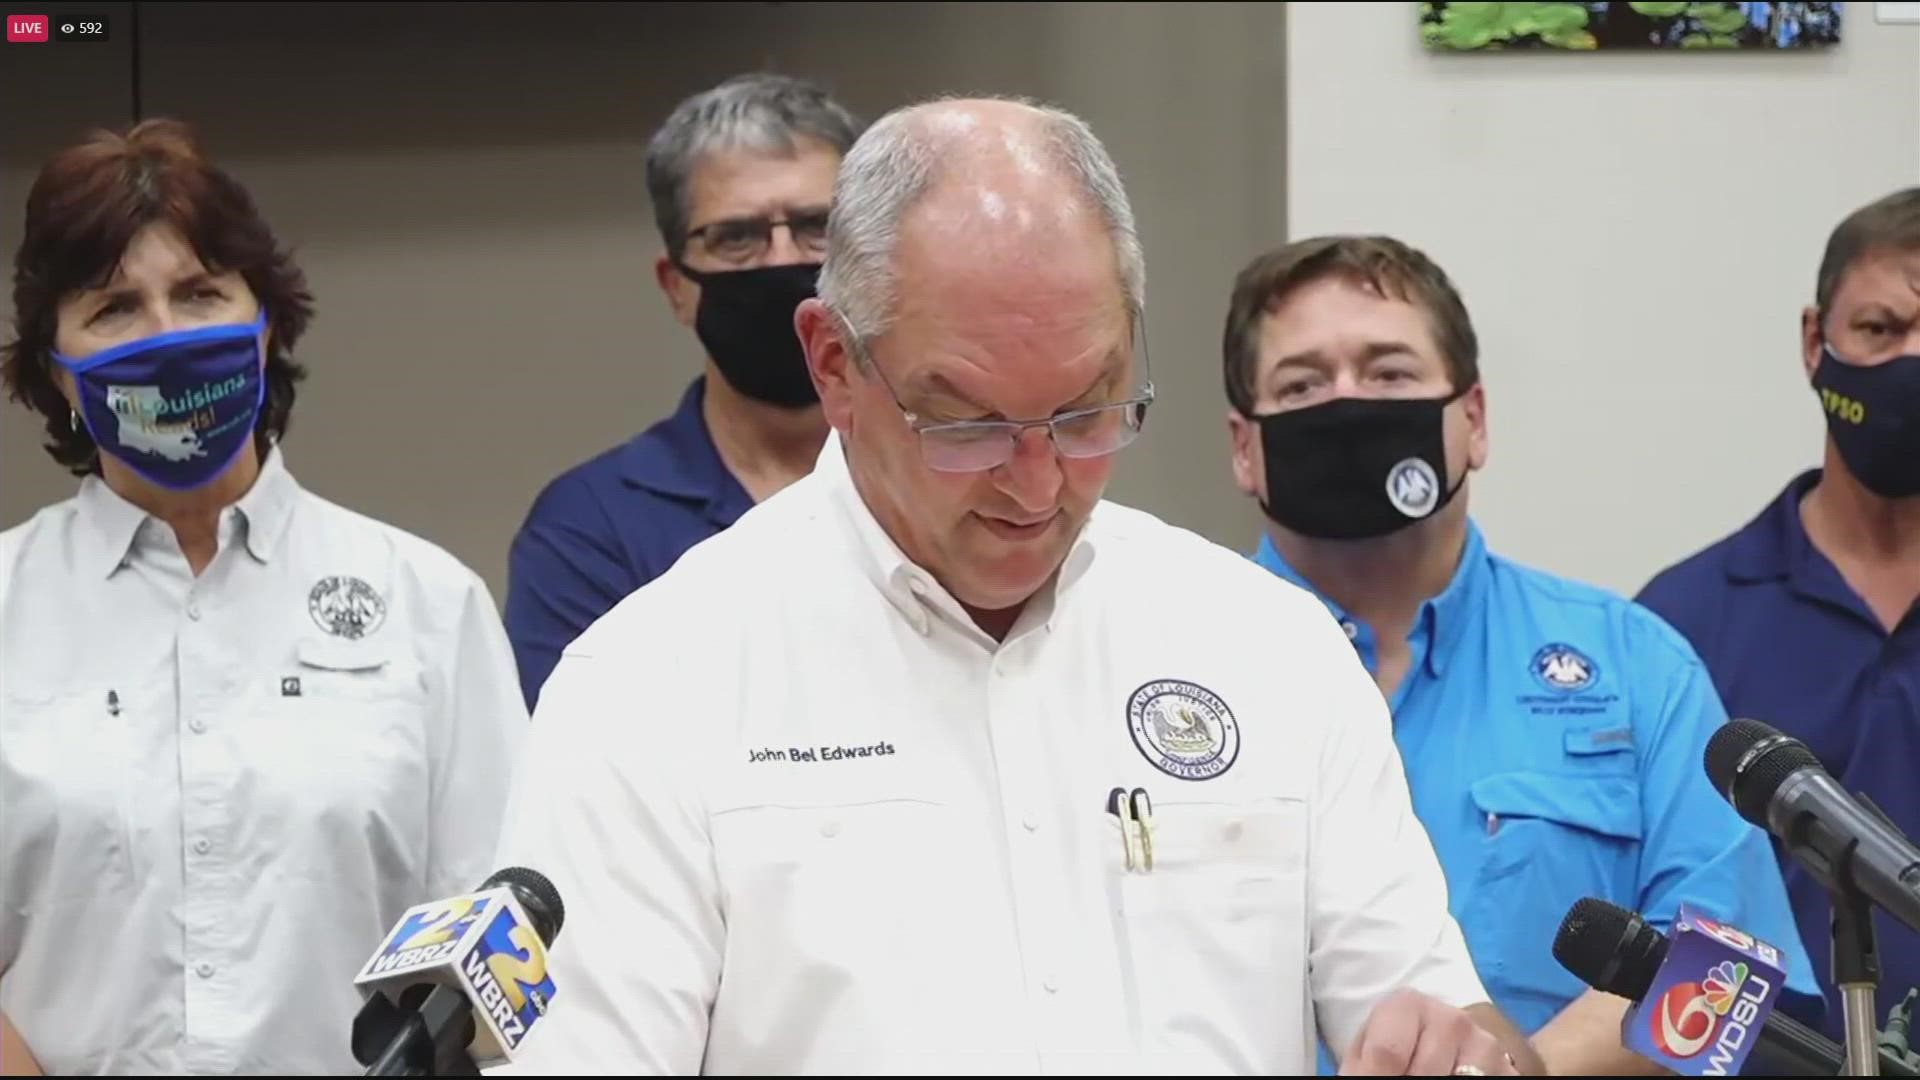 Four nursing home residents died after being packed into a warehouse during Hurricane Ida. Gov. Edwards says the state will take legal action if necessary.